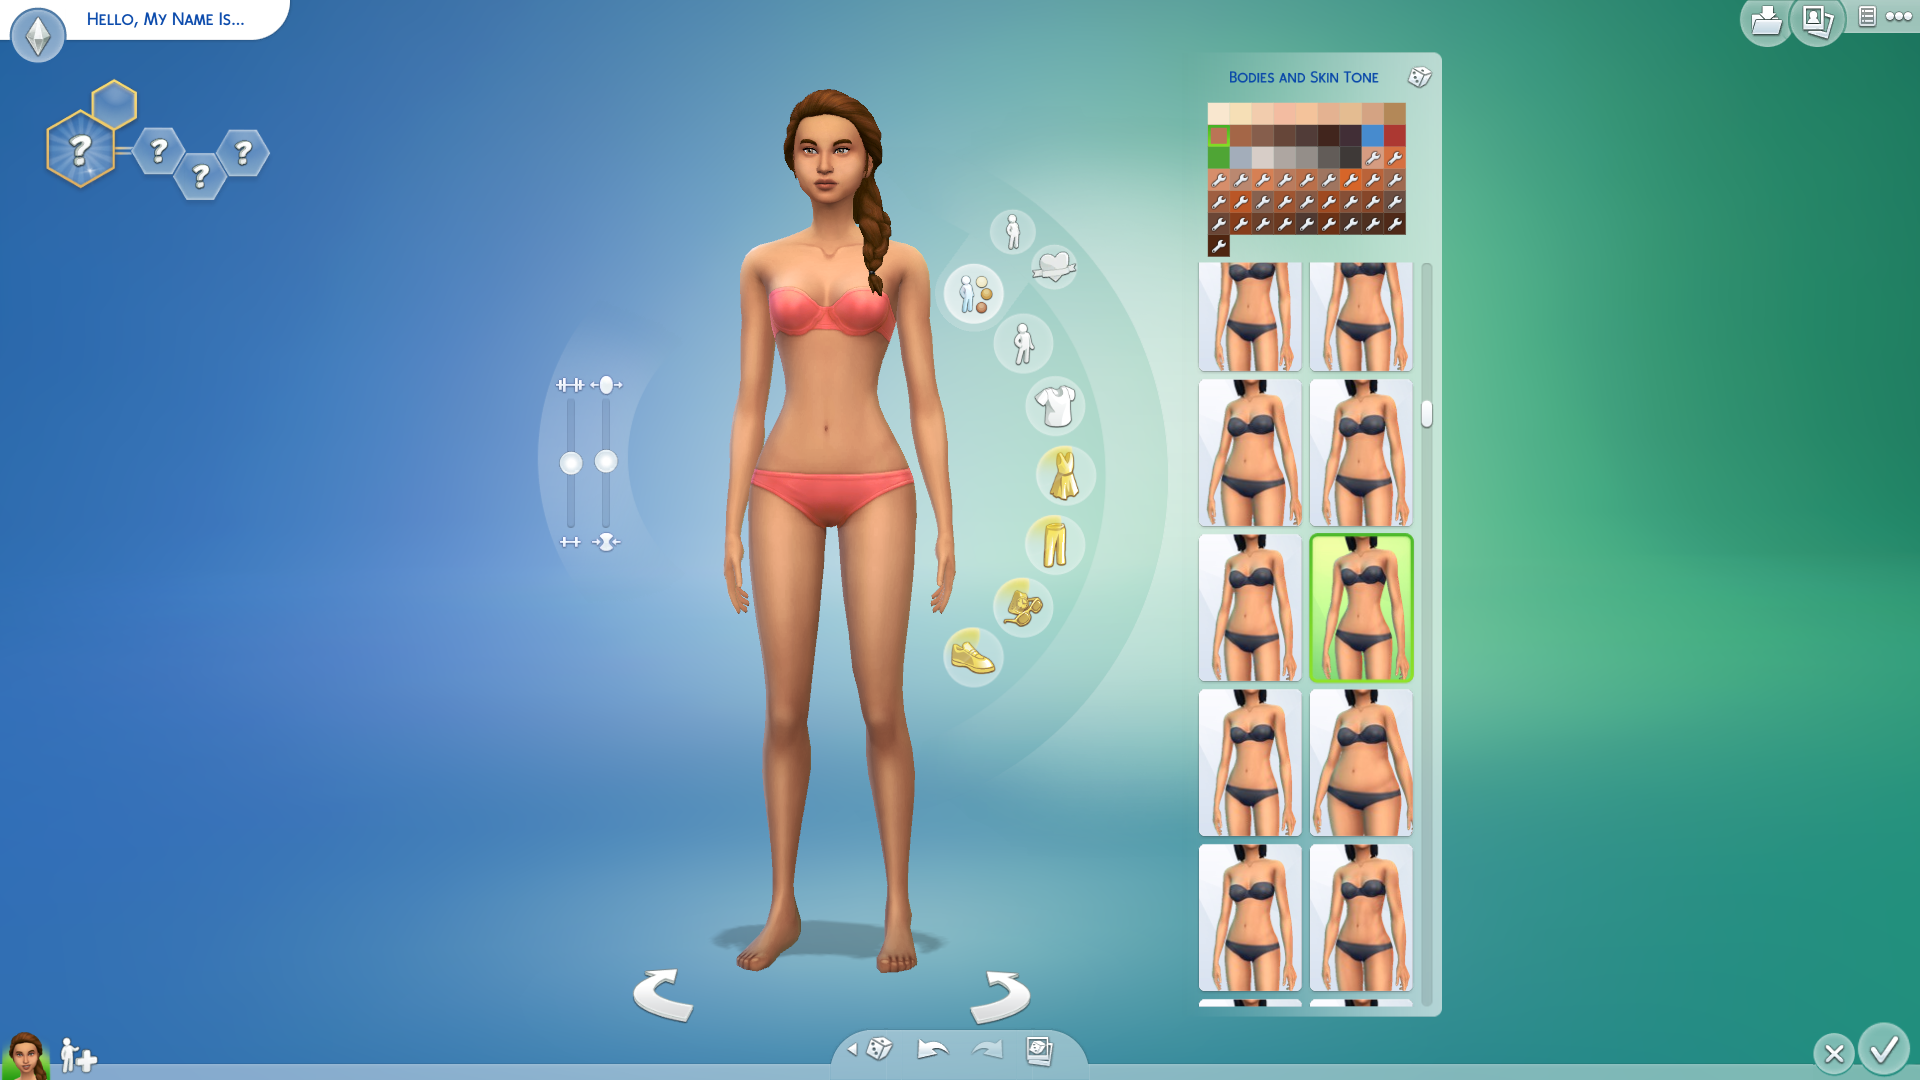 Sims 4 extreme body sliders